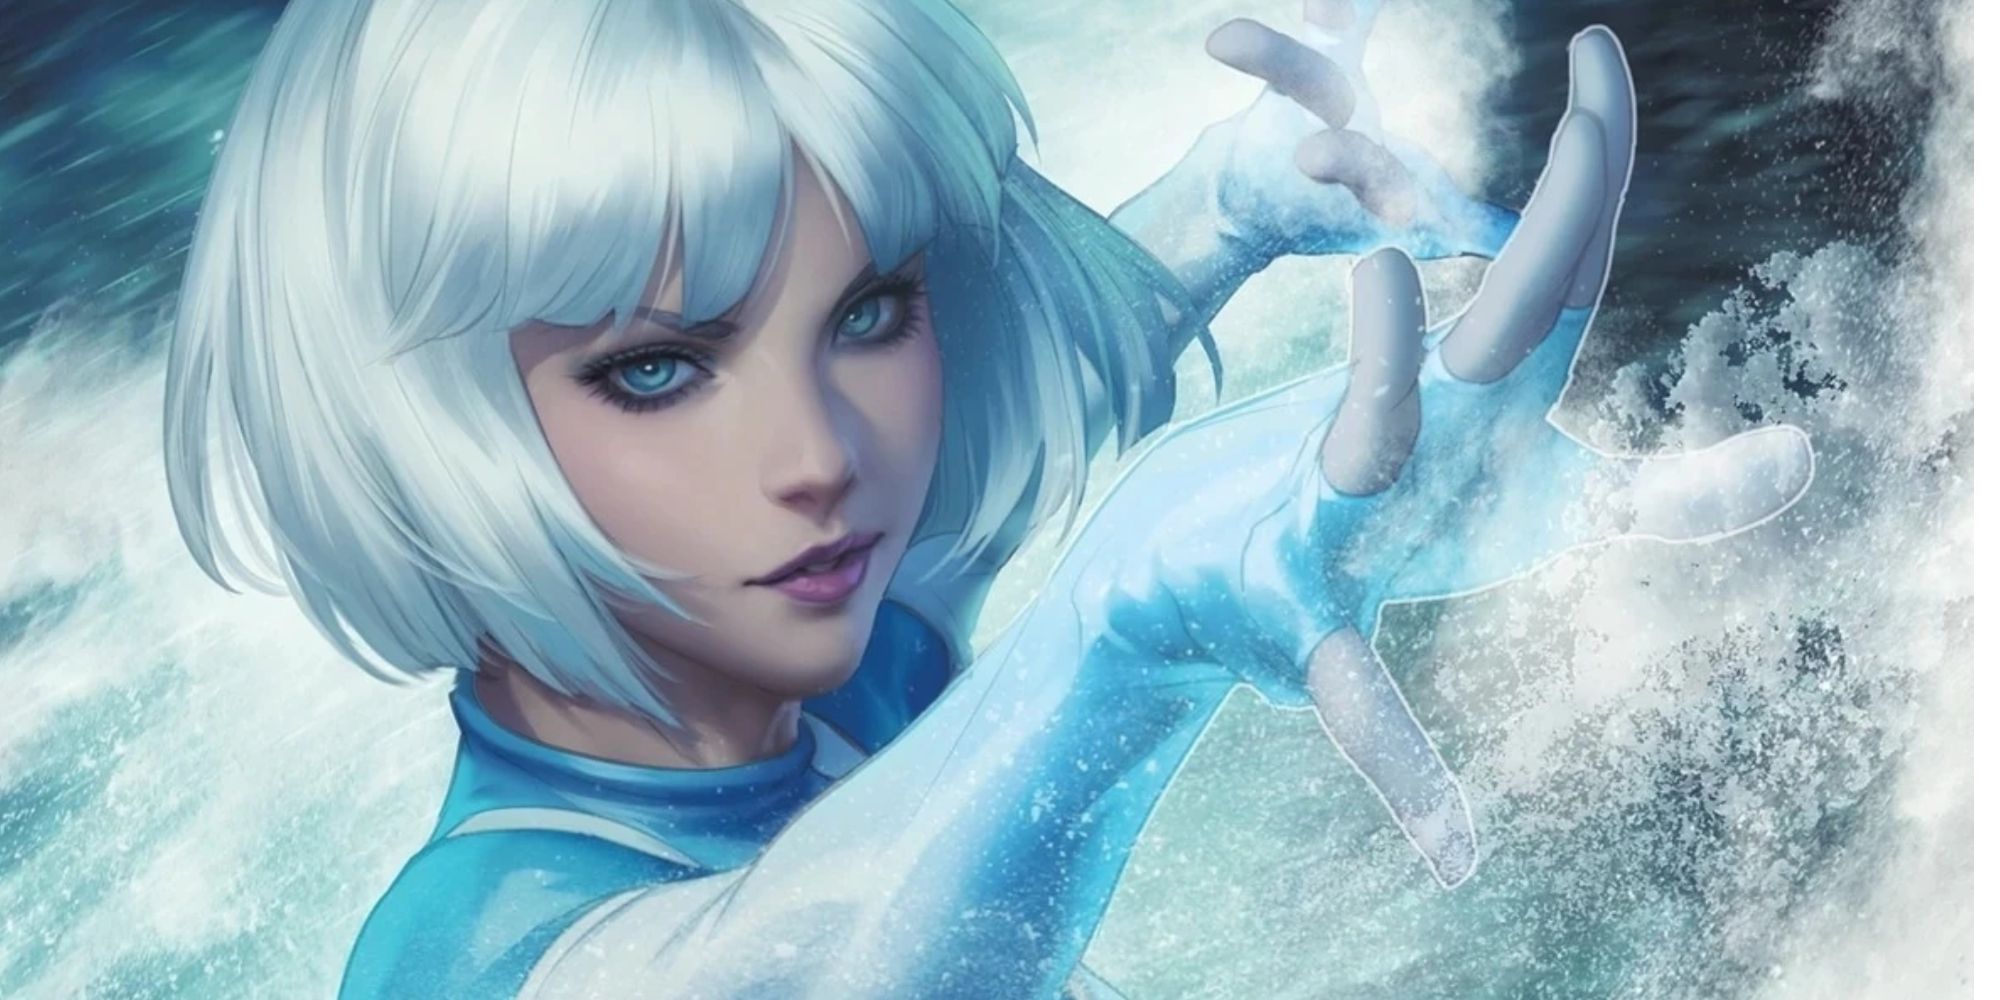 Ice from DC comics using her powers.